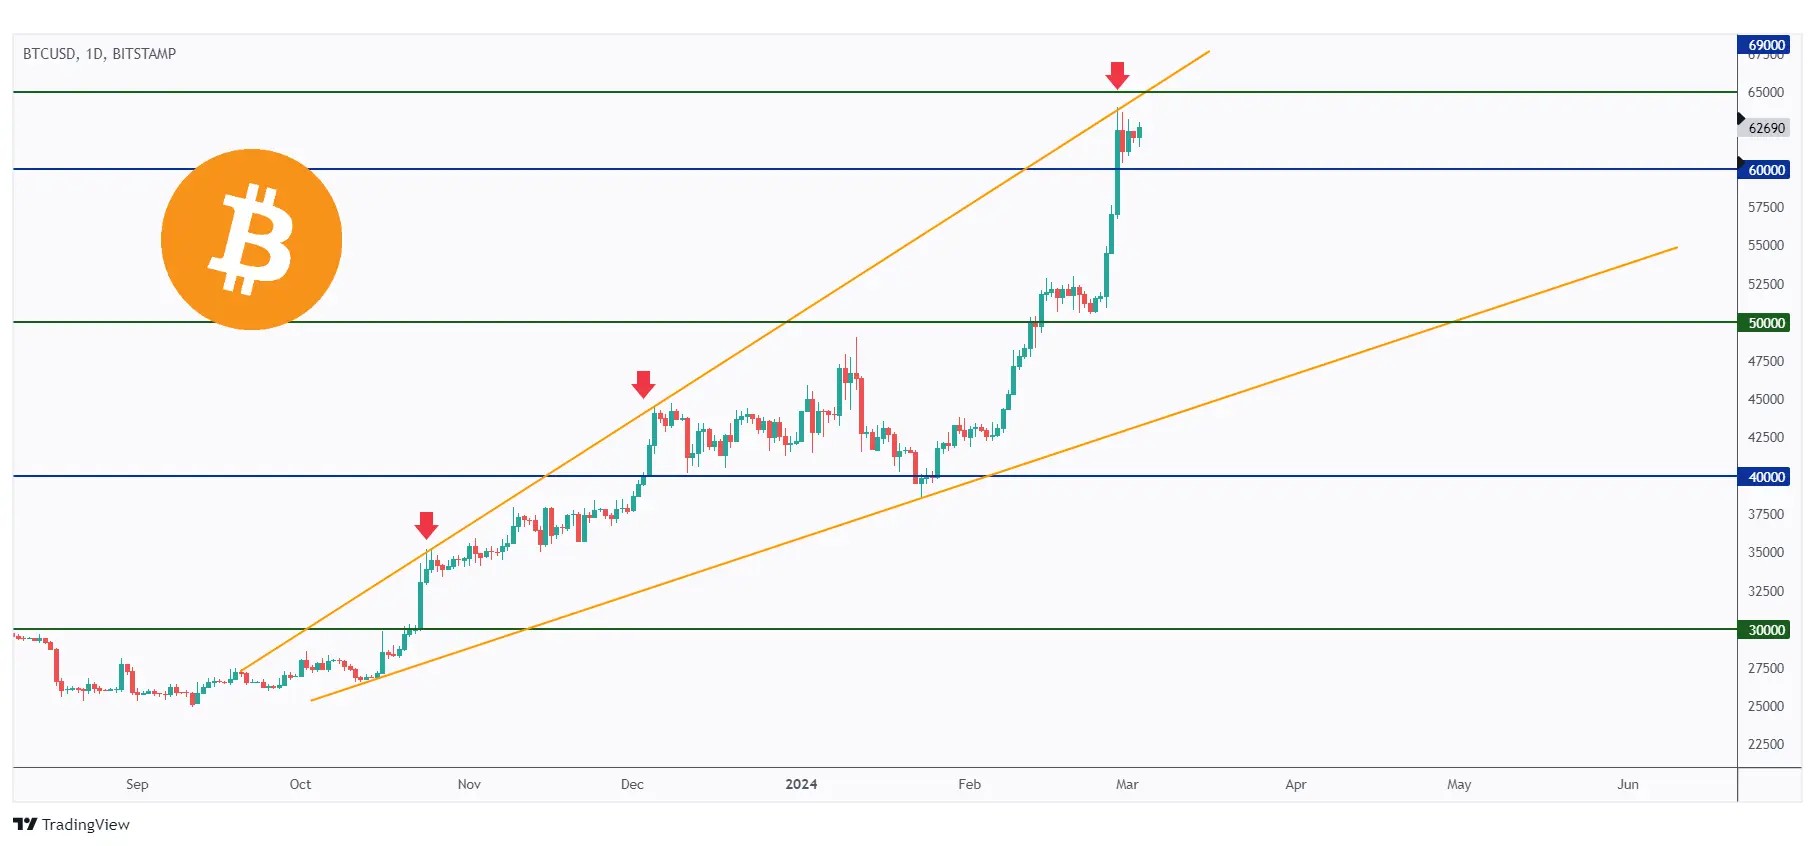 BTC daily showing the overall bullish trend and the $65,000 resistance level.